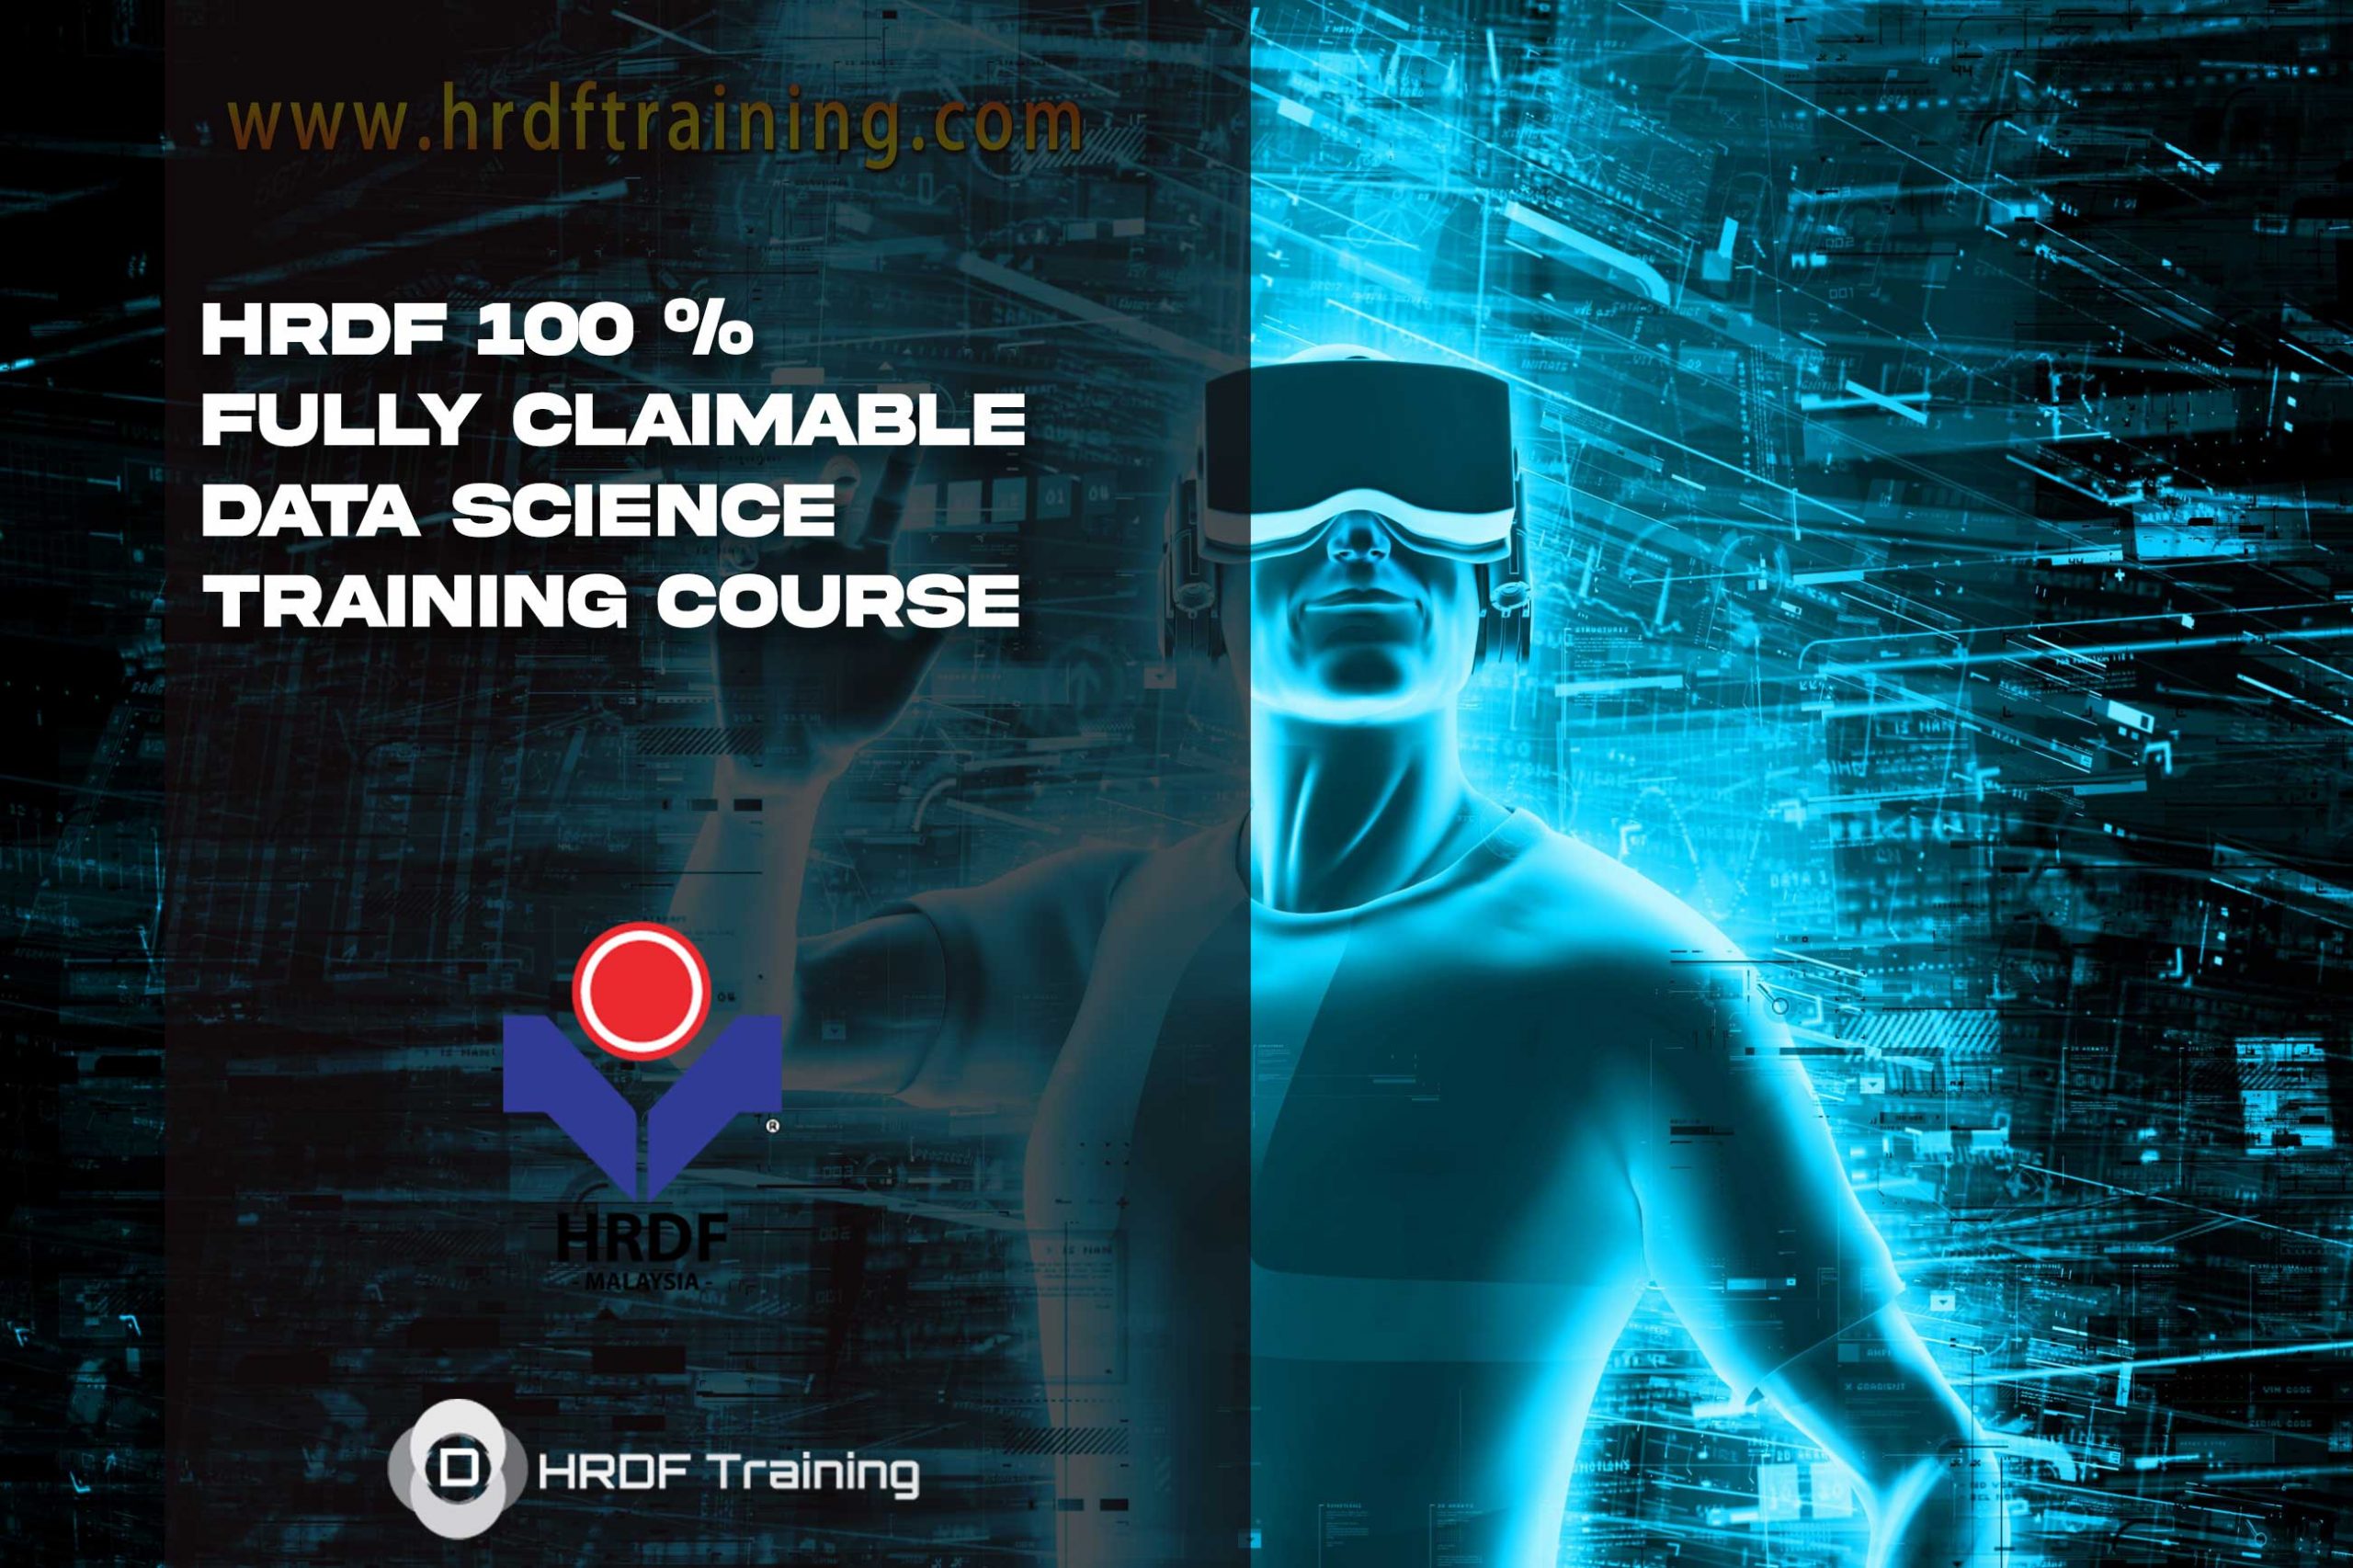 HRDF 100 % Fully Claimable Data Science Training Course